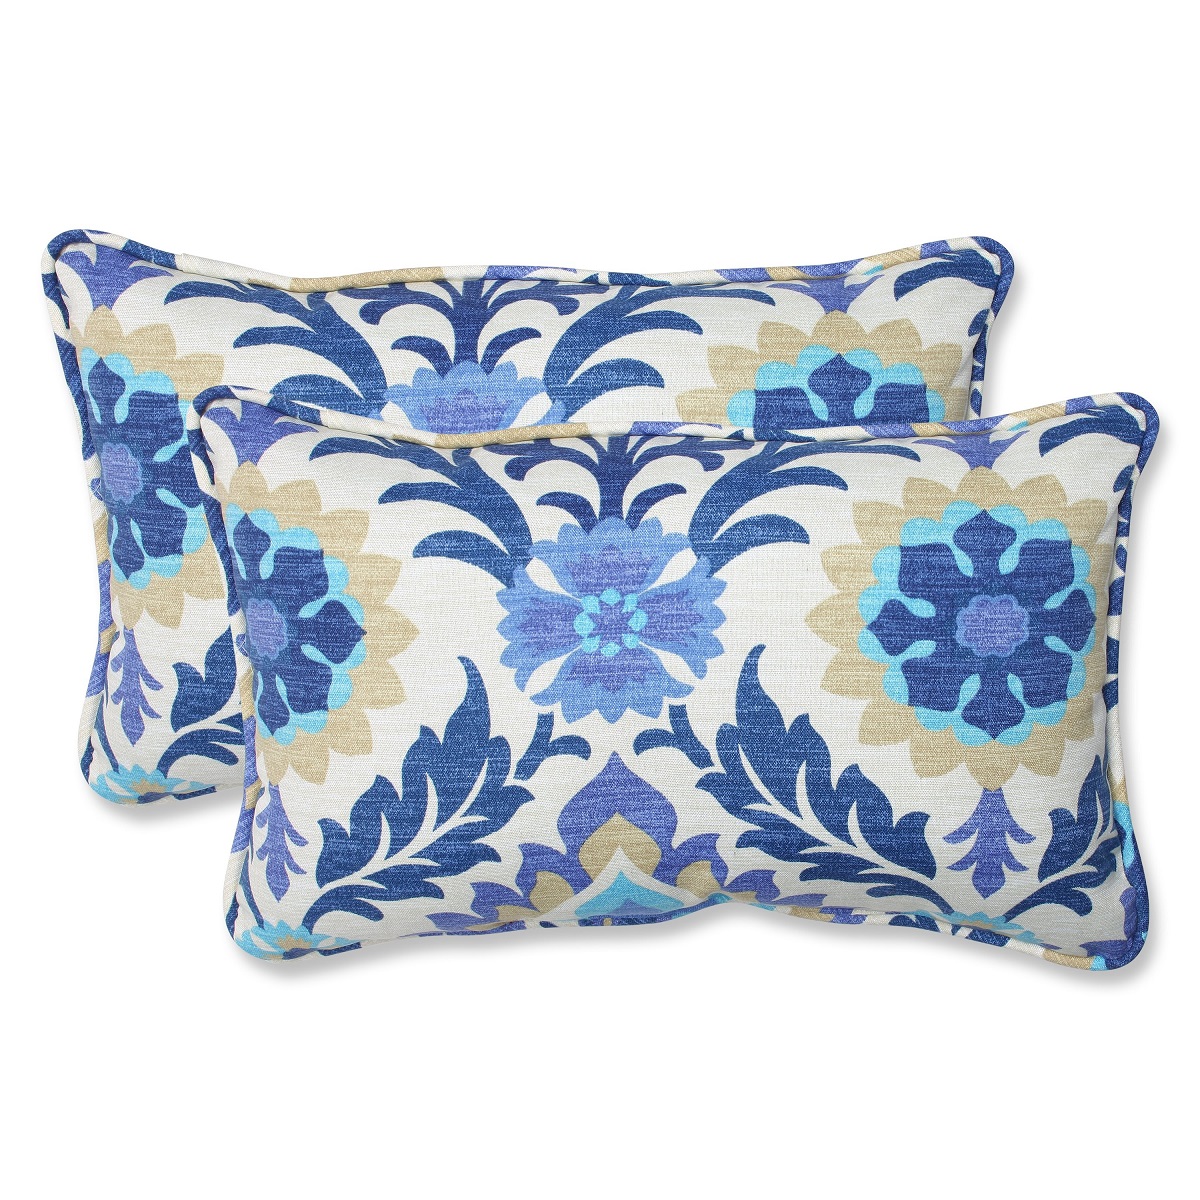 Pillow Perfect Set of 2 Blue and White Damask Outdoor Corded Throw Pillows 18.5"